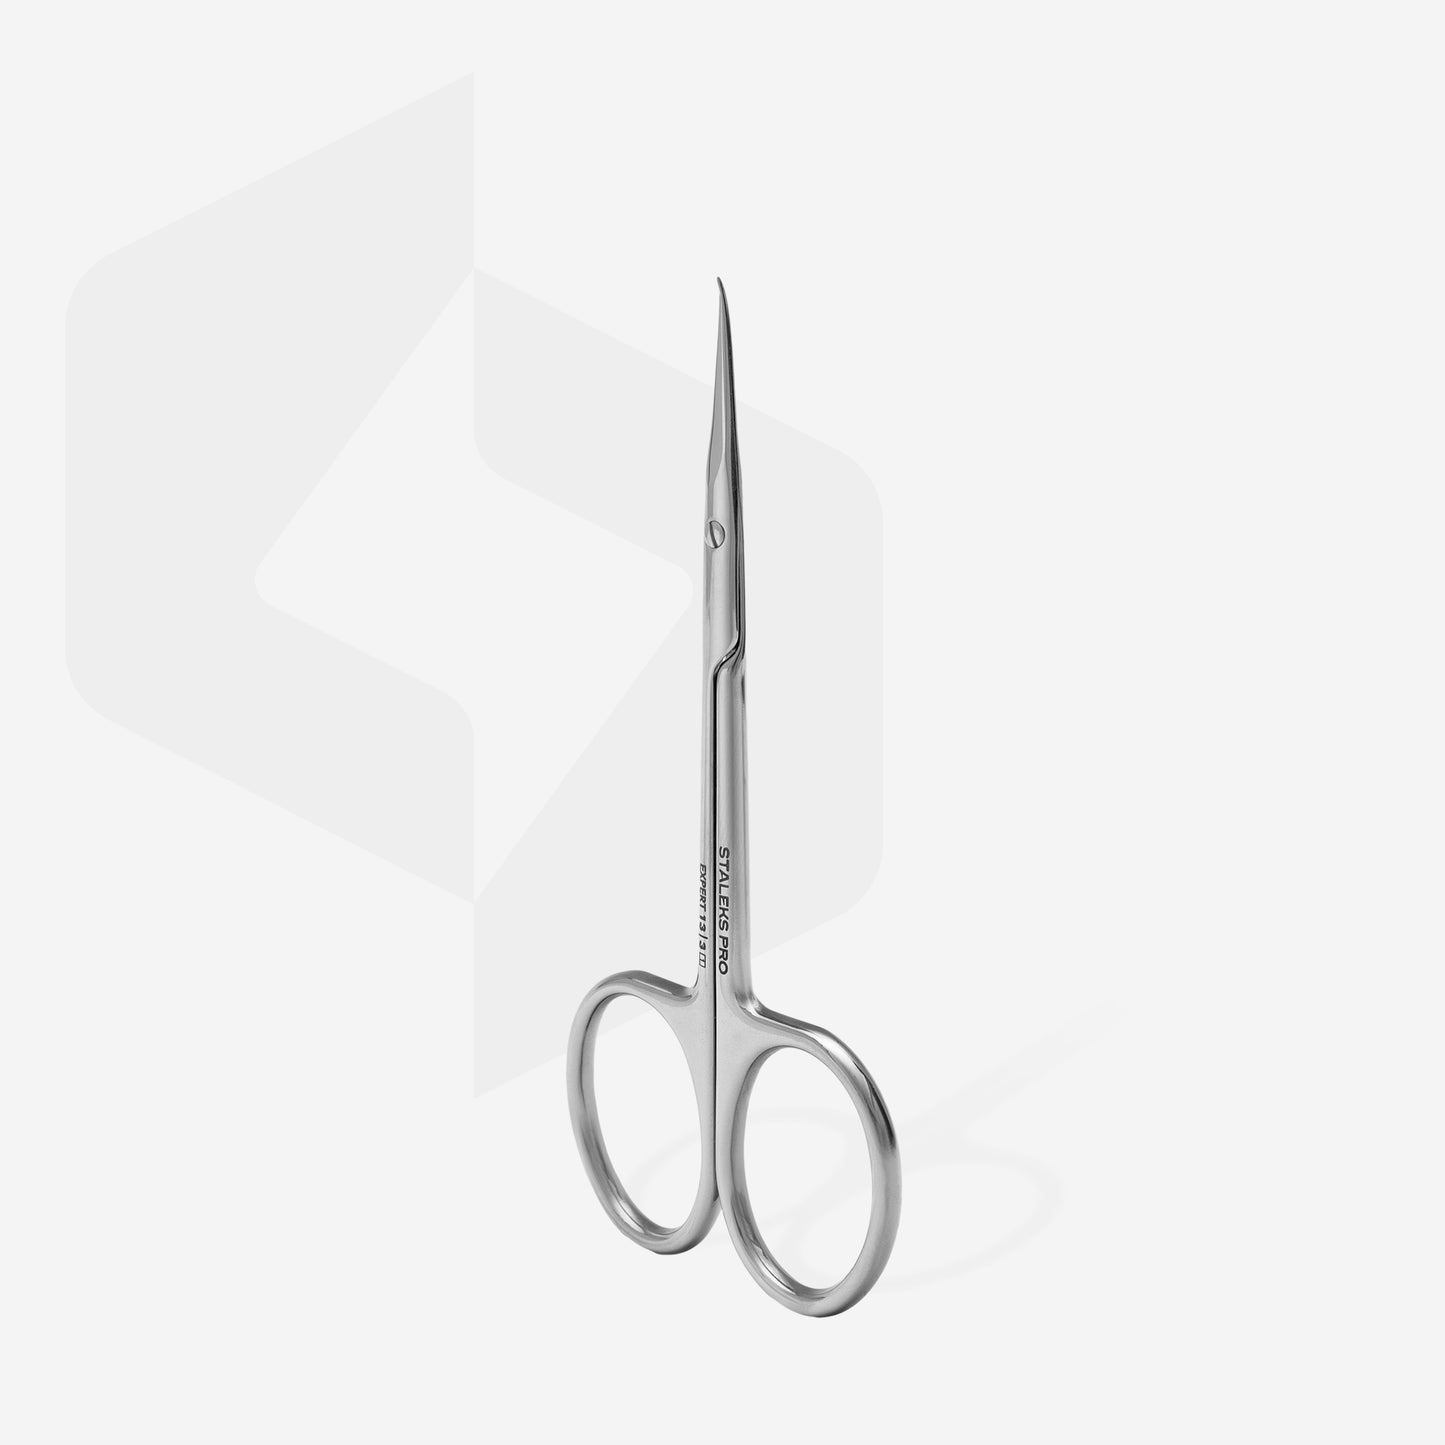 Professional cuticle scissors with hook for left-handed users EXPERT 13 TYPE 3, SE-13/3